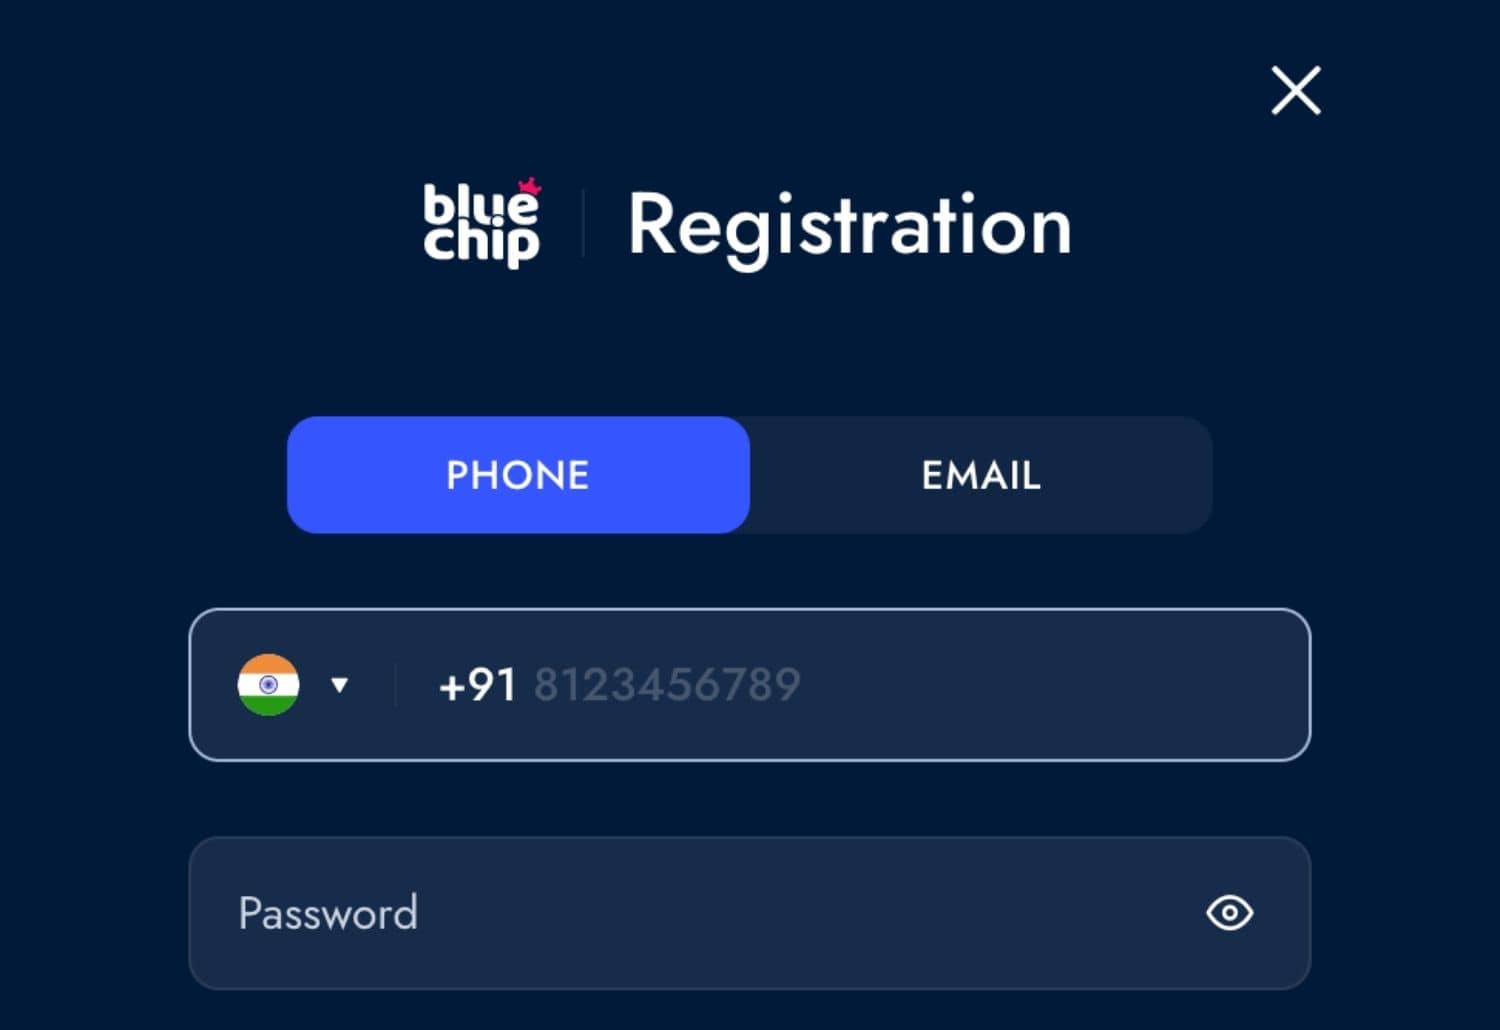 Bluechip Casino India registration process step by step